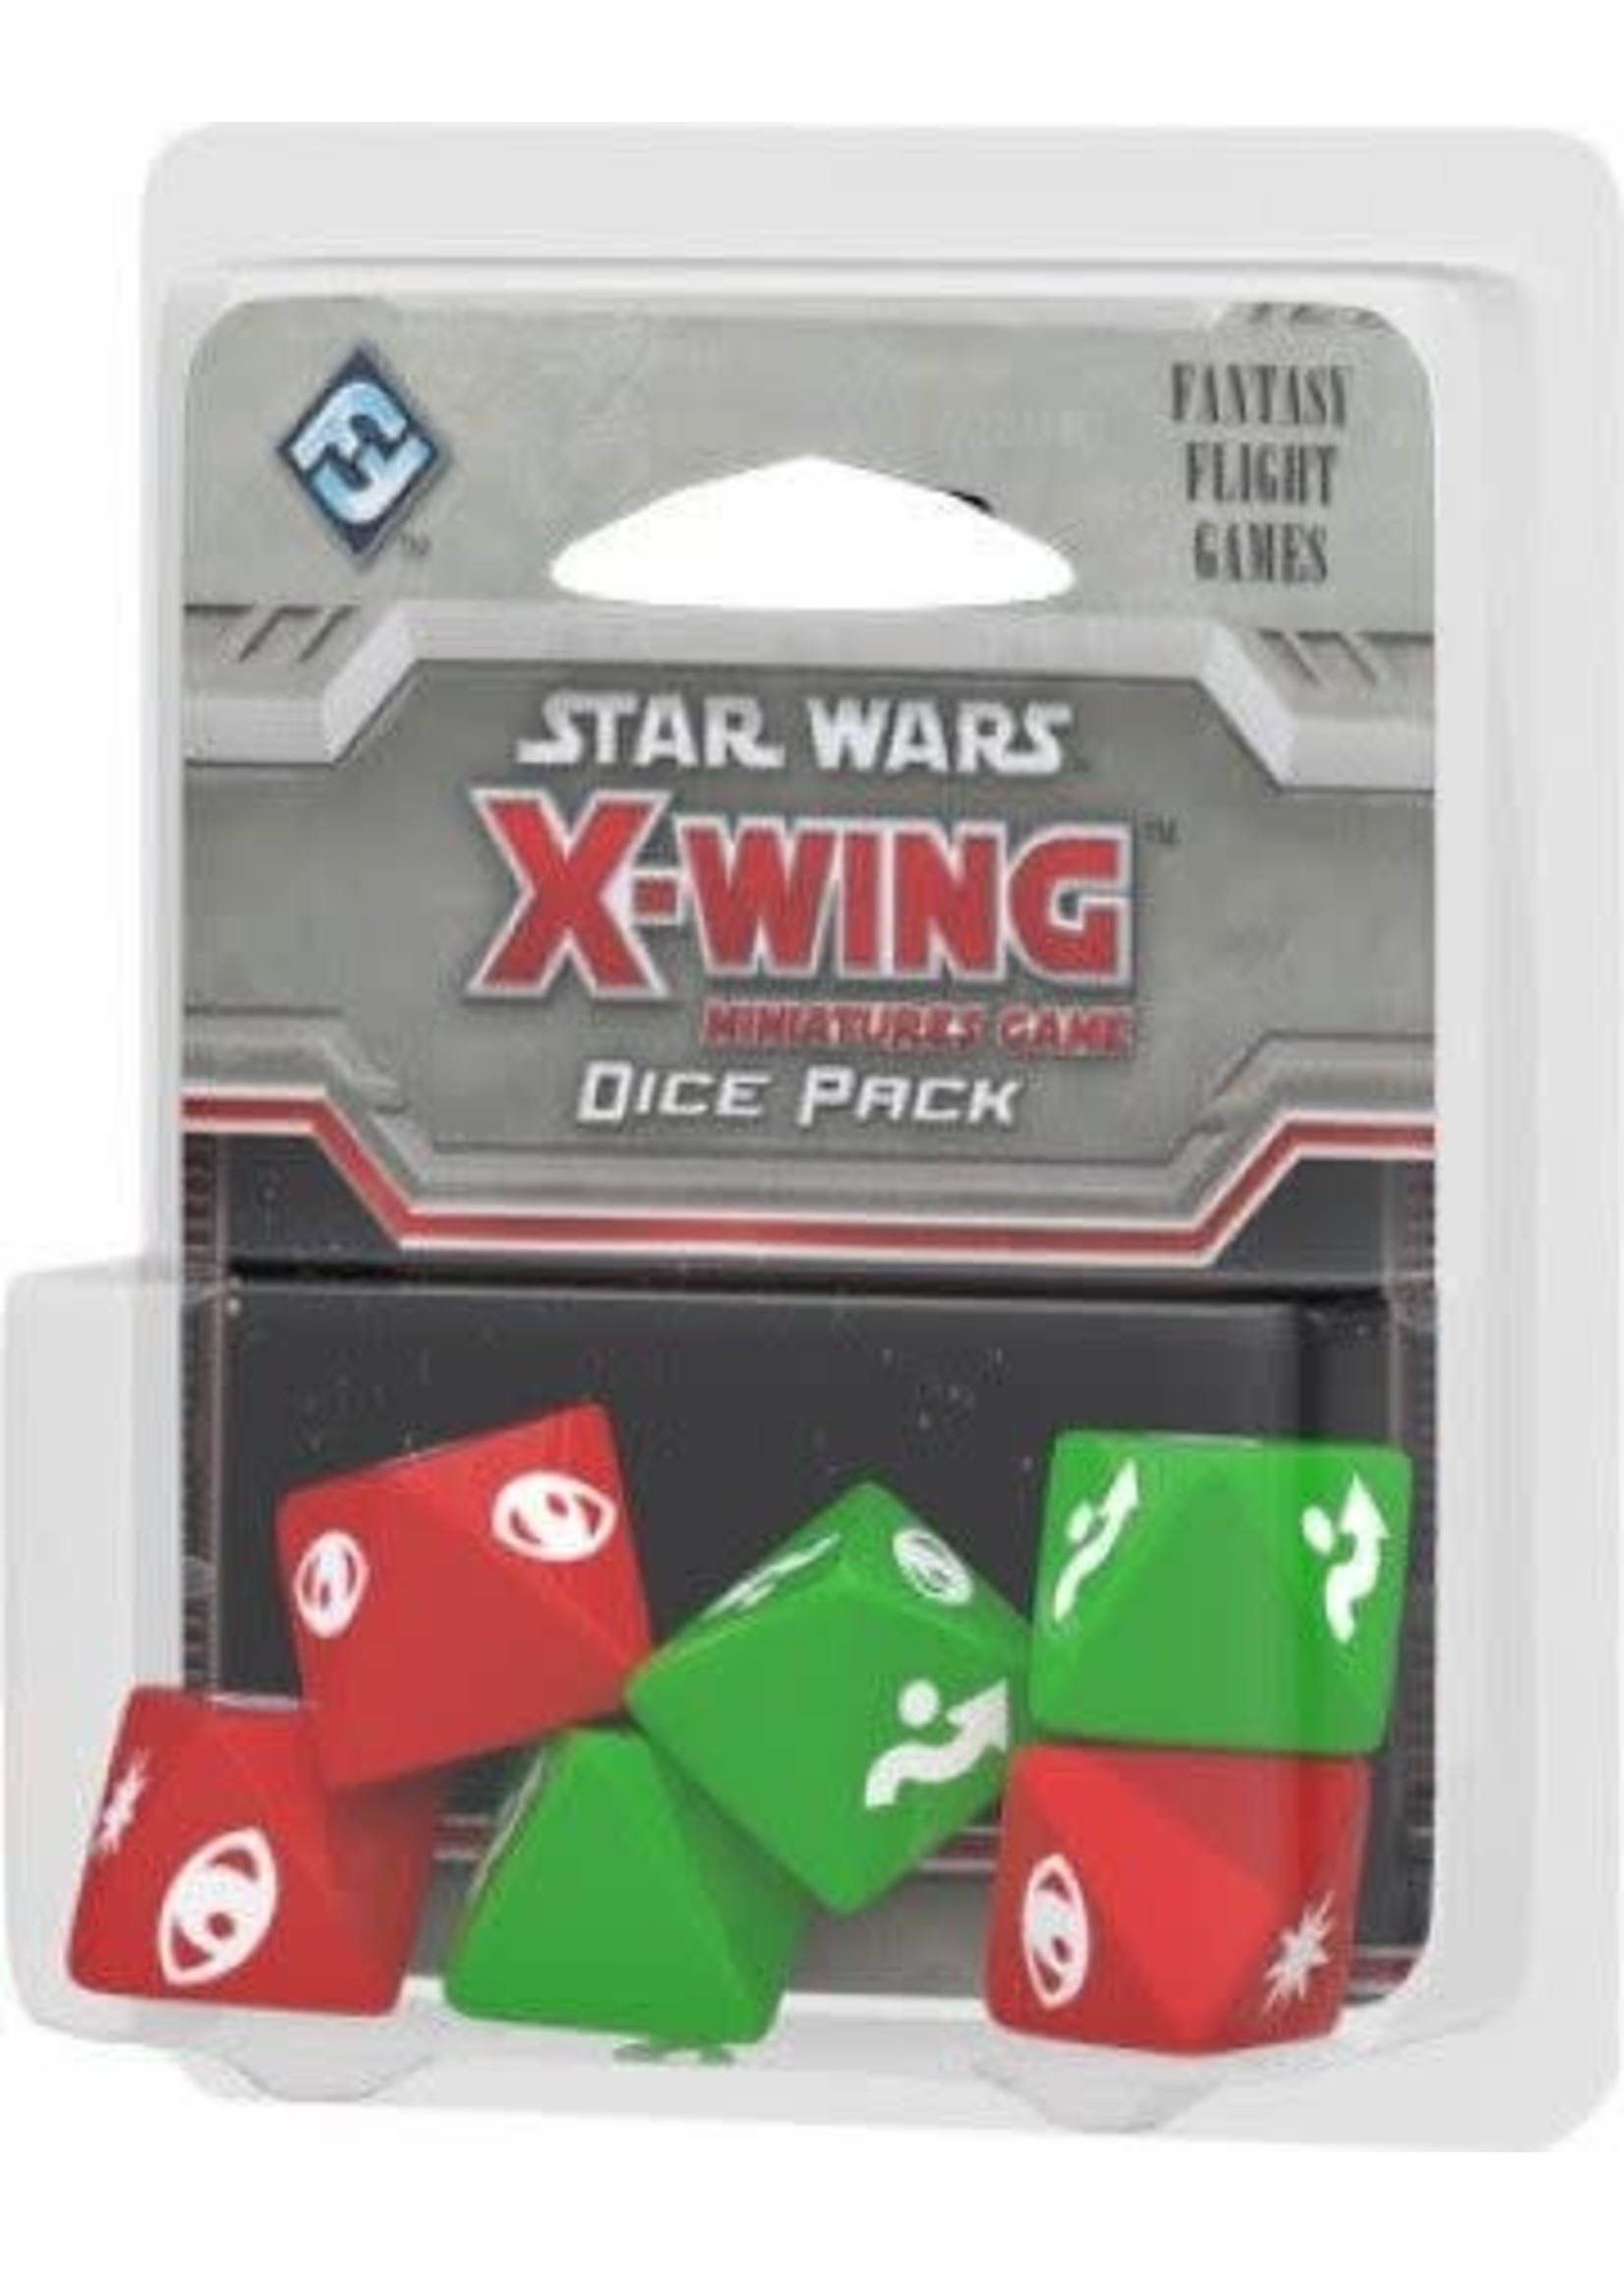 STAR WARS X-WING DICE PACK